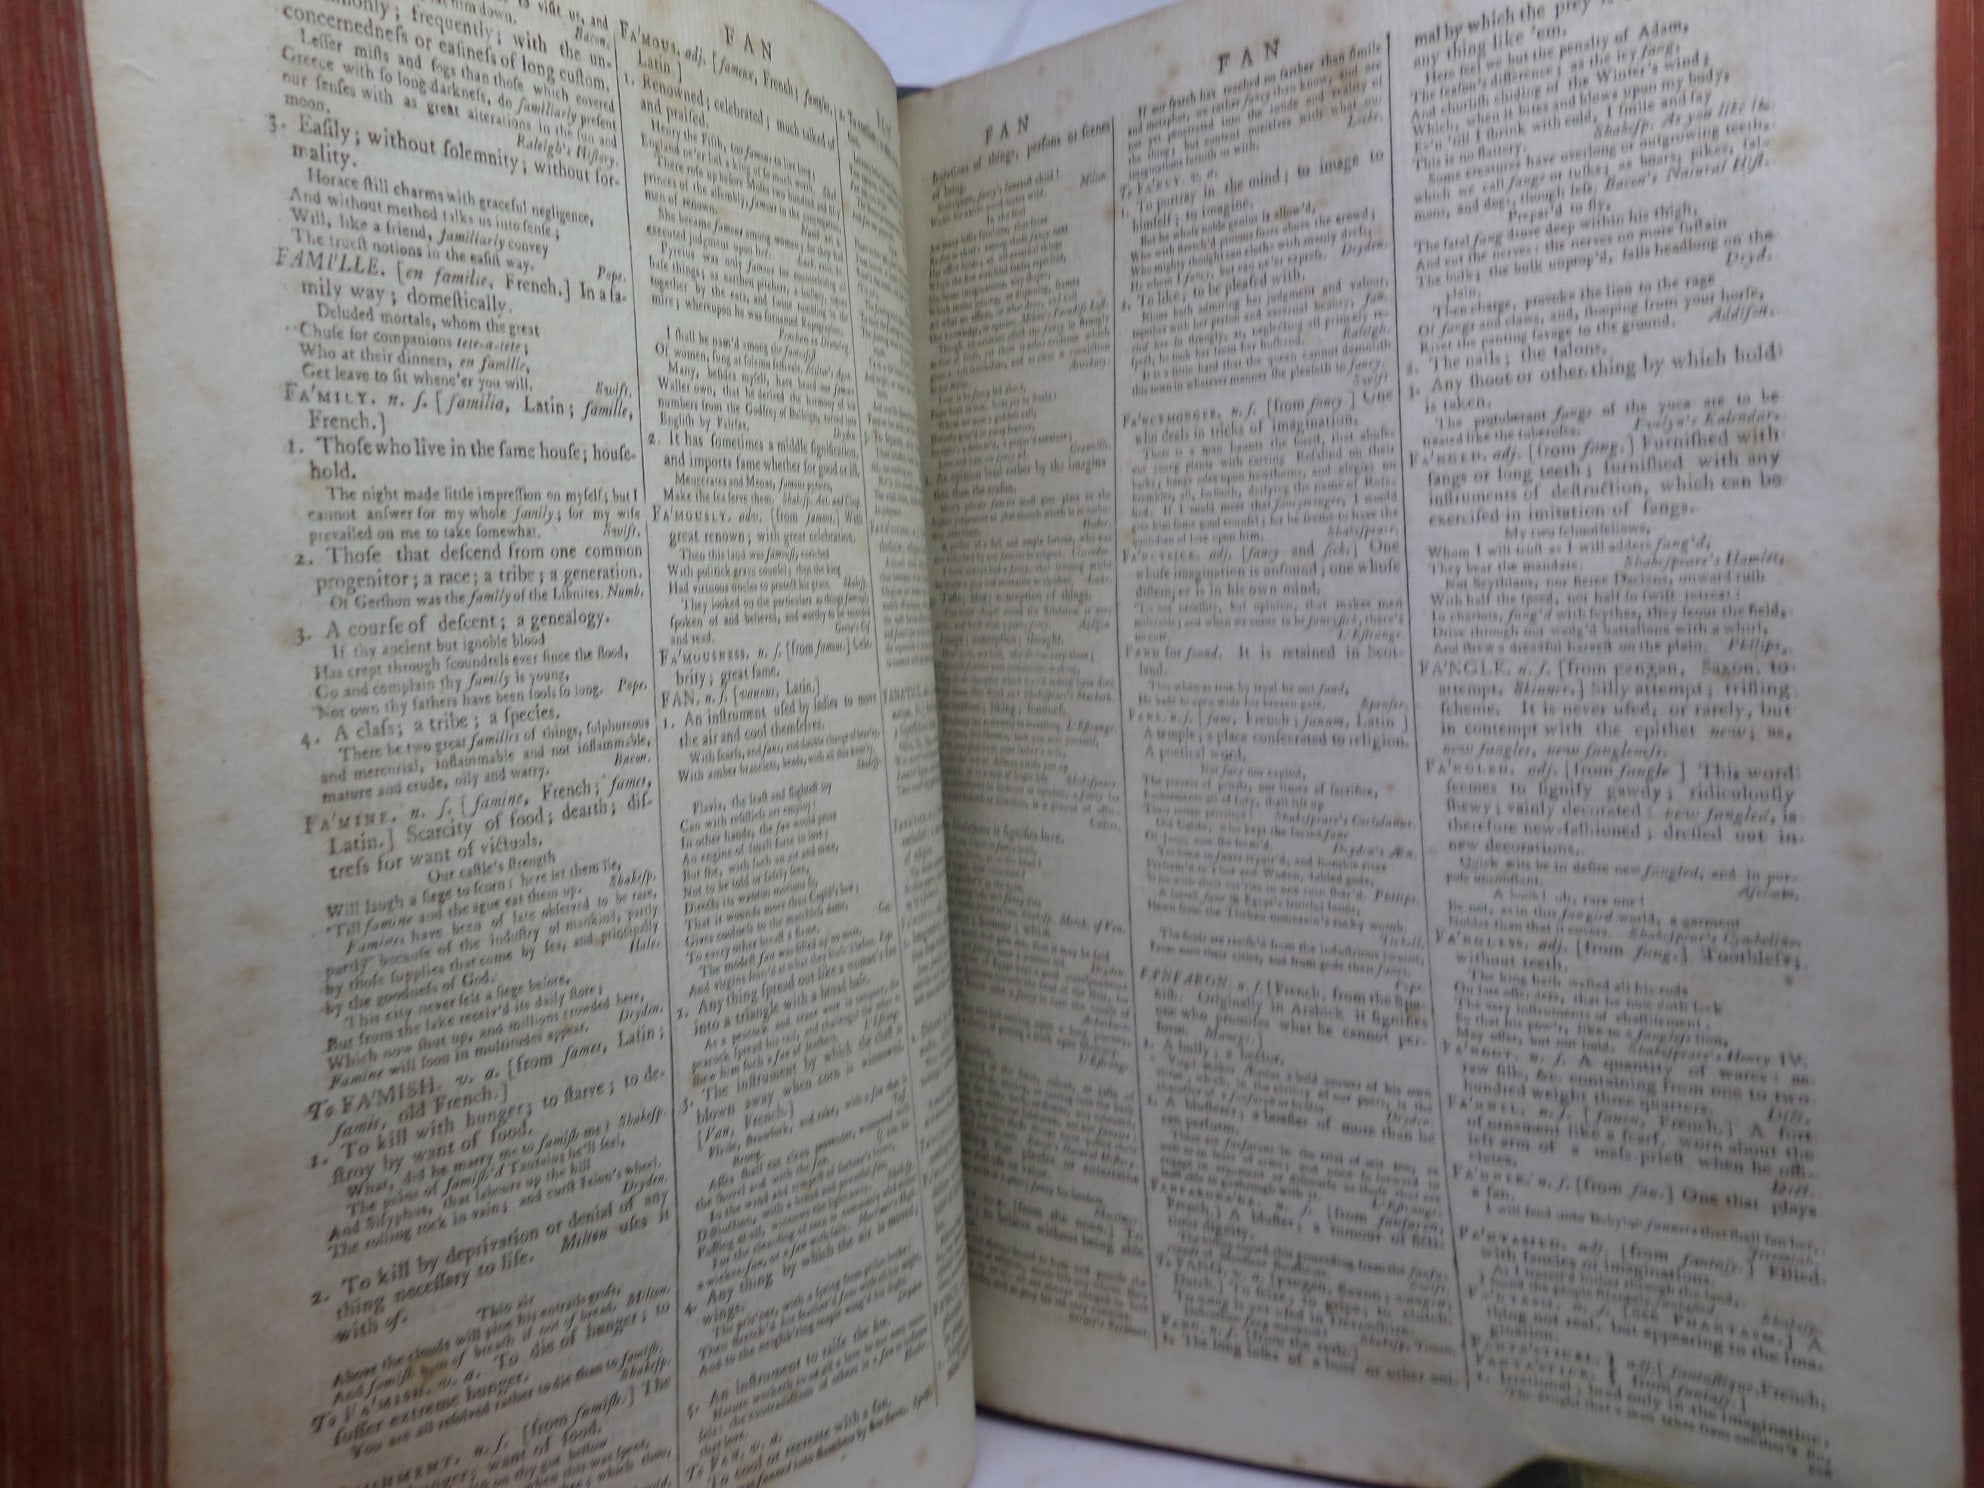 A DICTIONARY OF THE ENGLISH LANGUAGE BY SAMUEL JOHNSON 1785 LEATHER BOUND